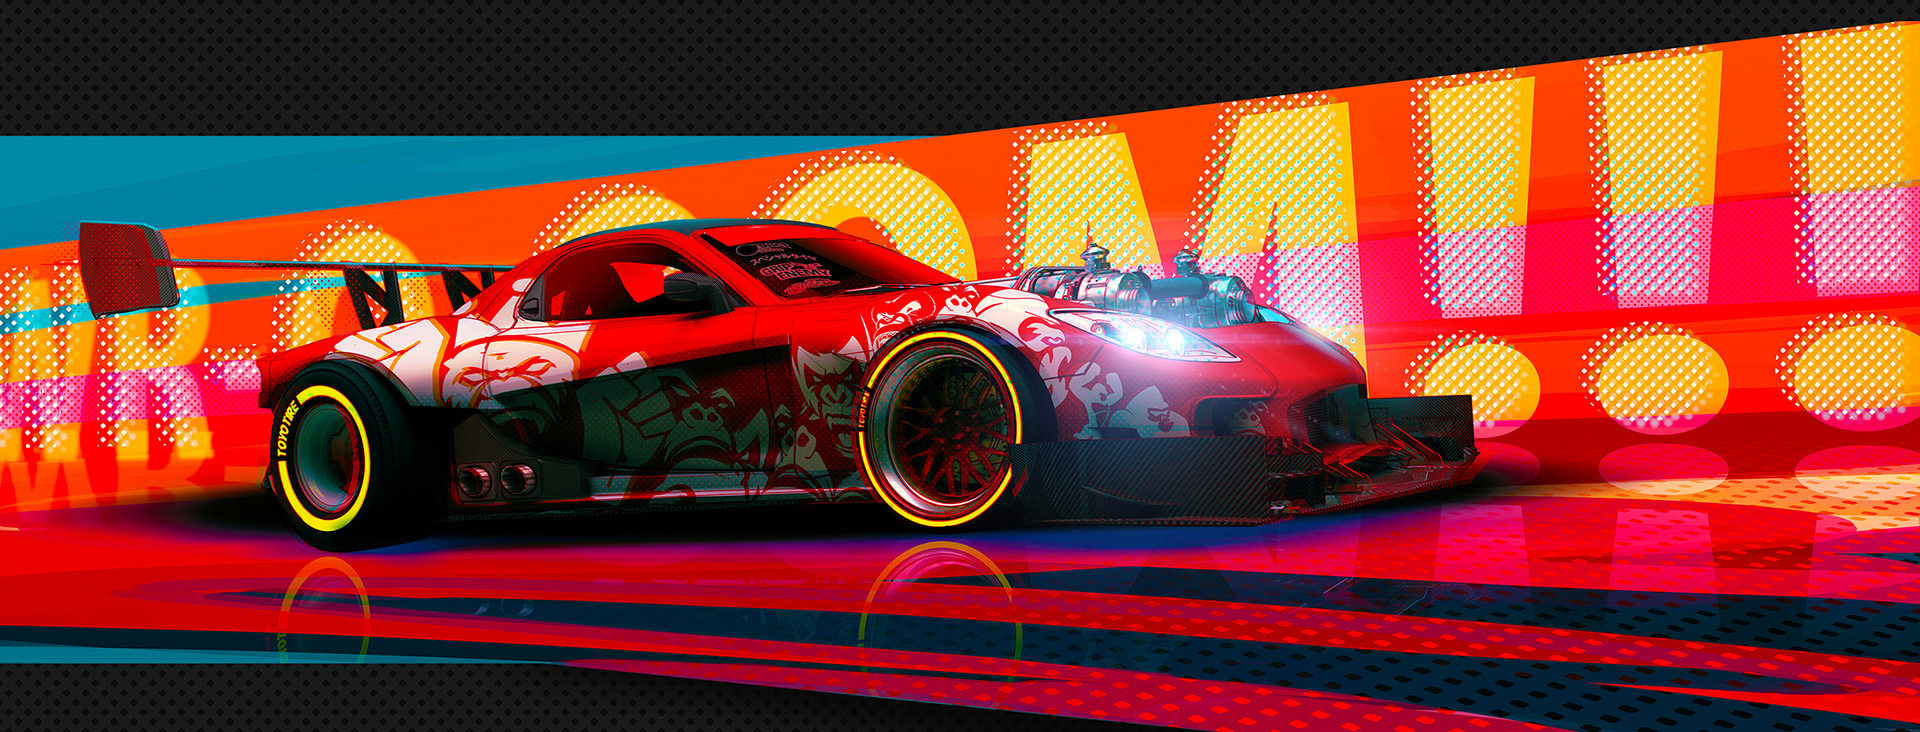 Dragons GANG! (RX-7) + FREE Gumroad Decals on Behance6a41a774947749.5c4908a99018a.jpg